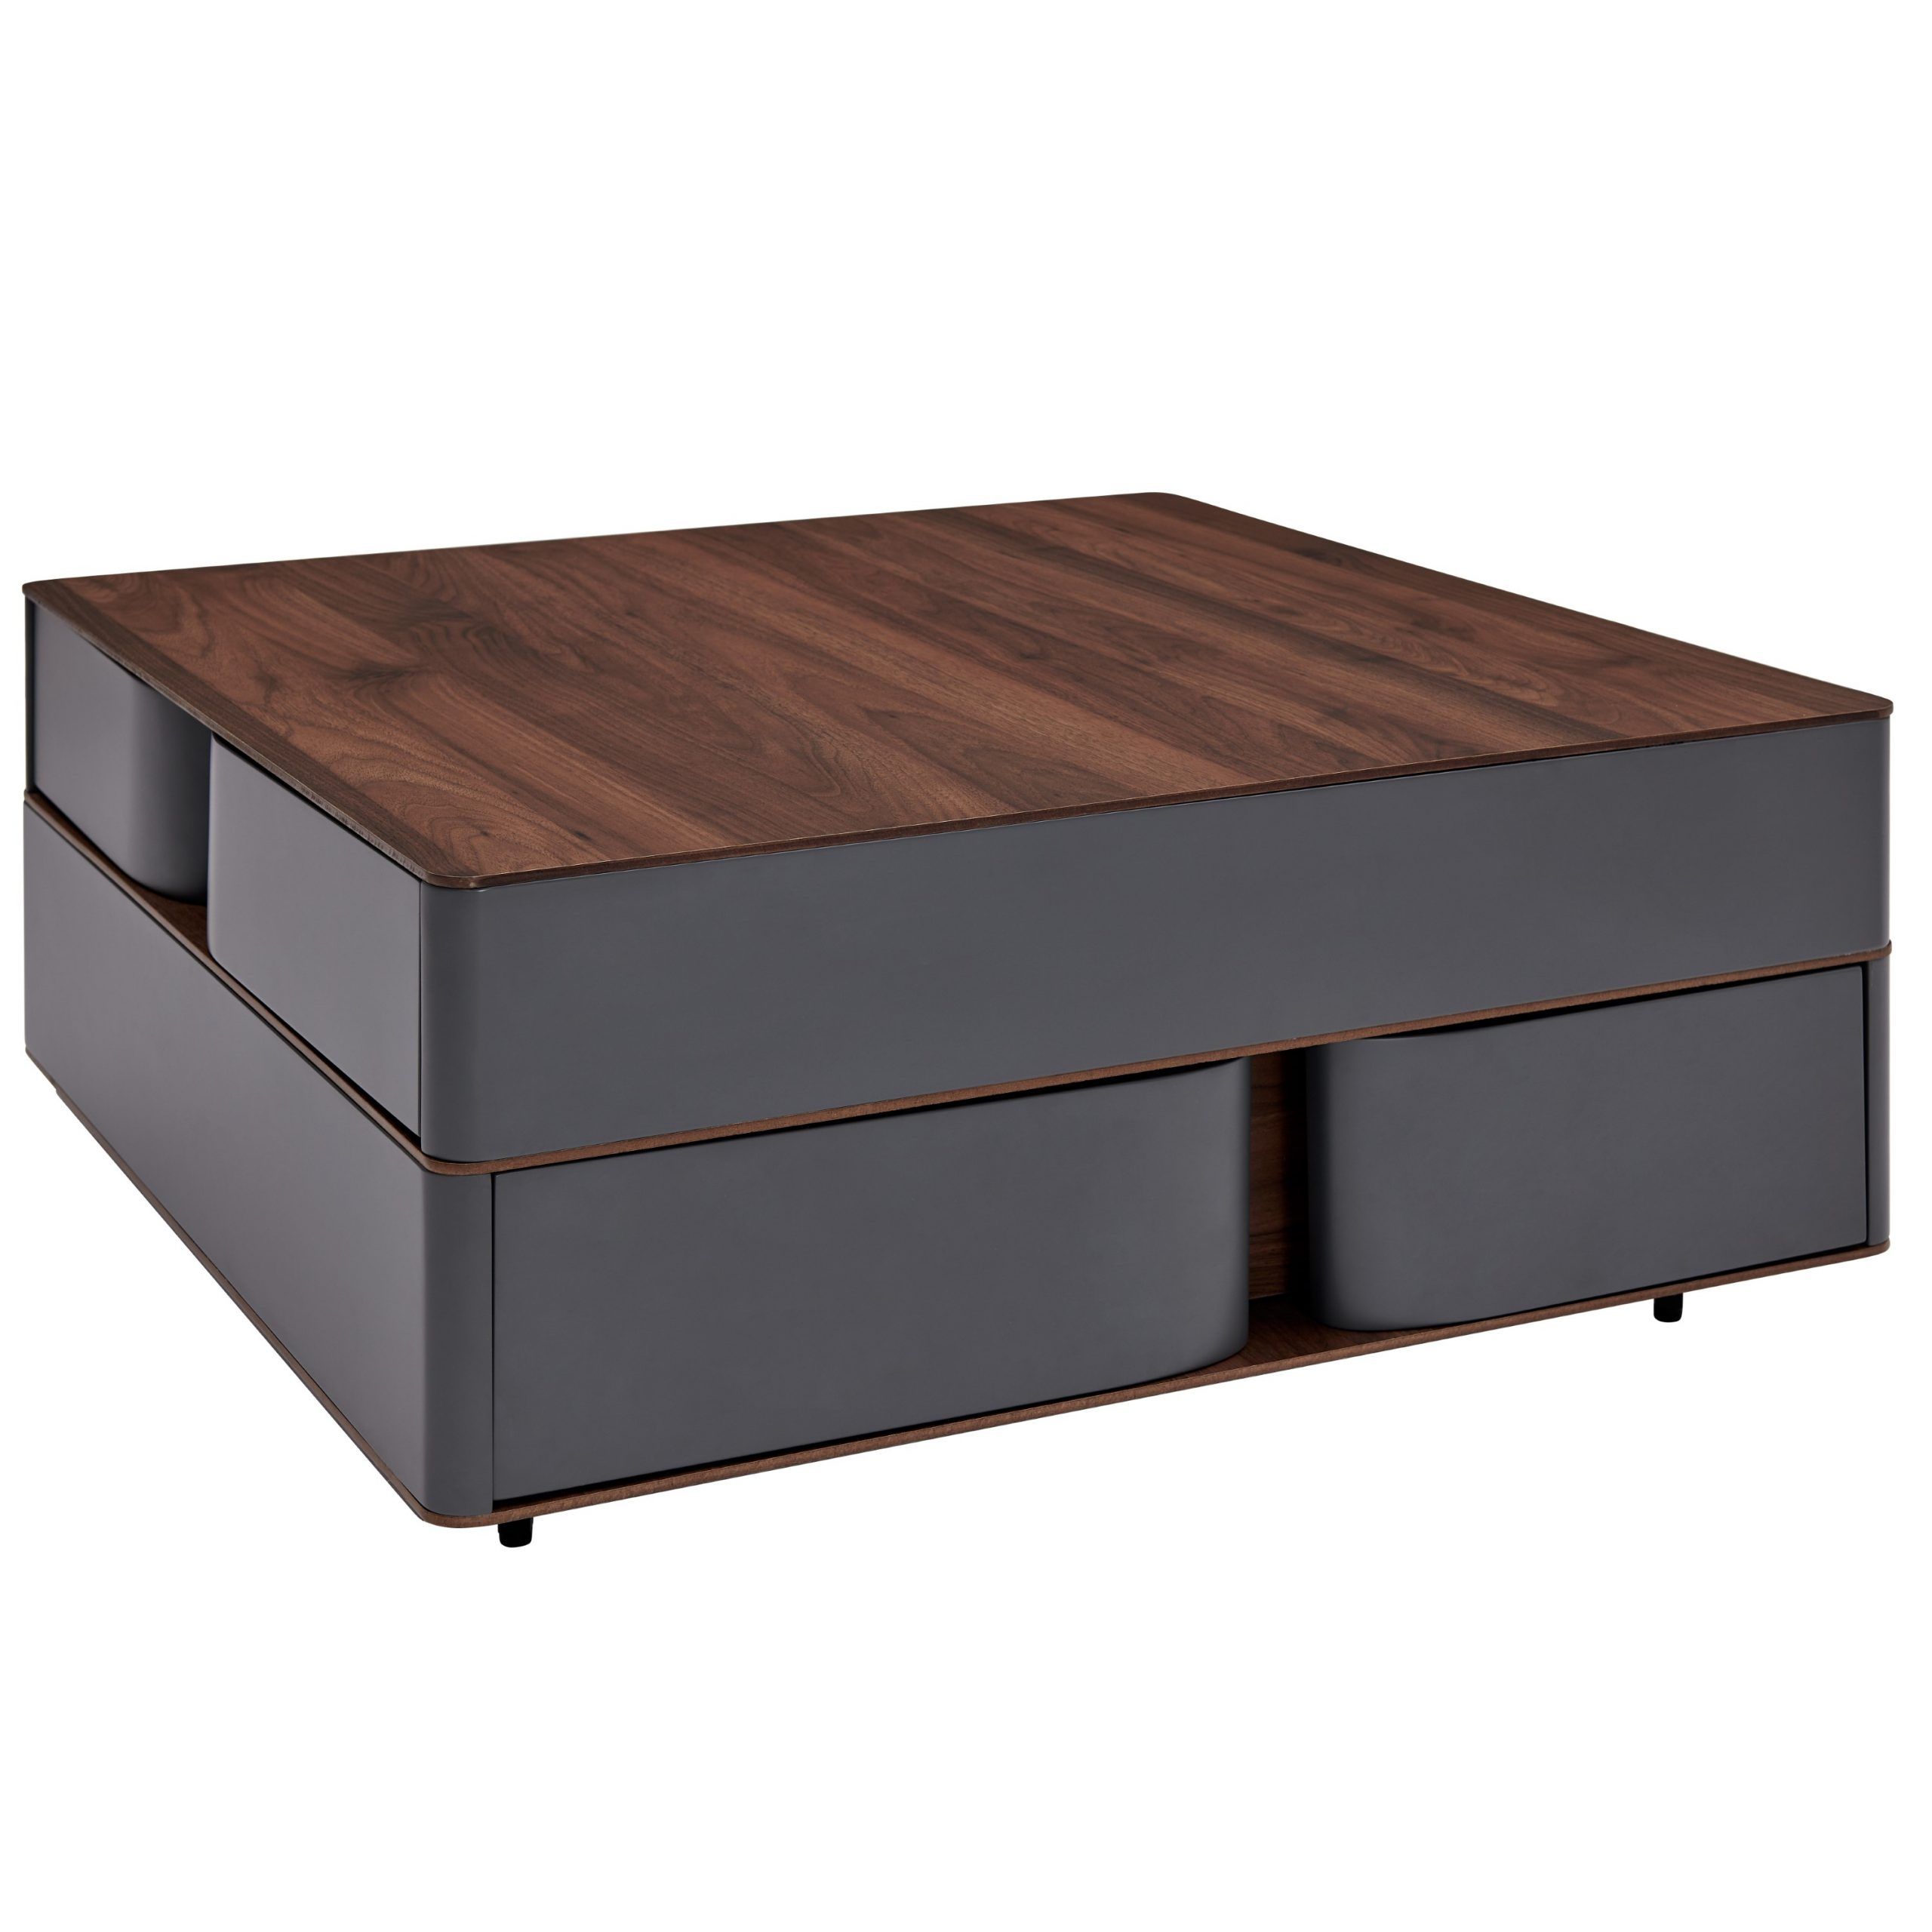 Most Recent Square Coffee Tables Pertaining To Marcus Square Storage Coffee Table – Walmart – Walmart (View 3 of 20)